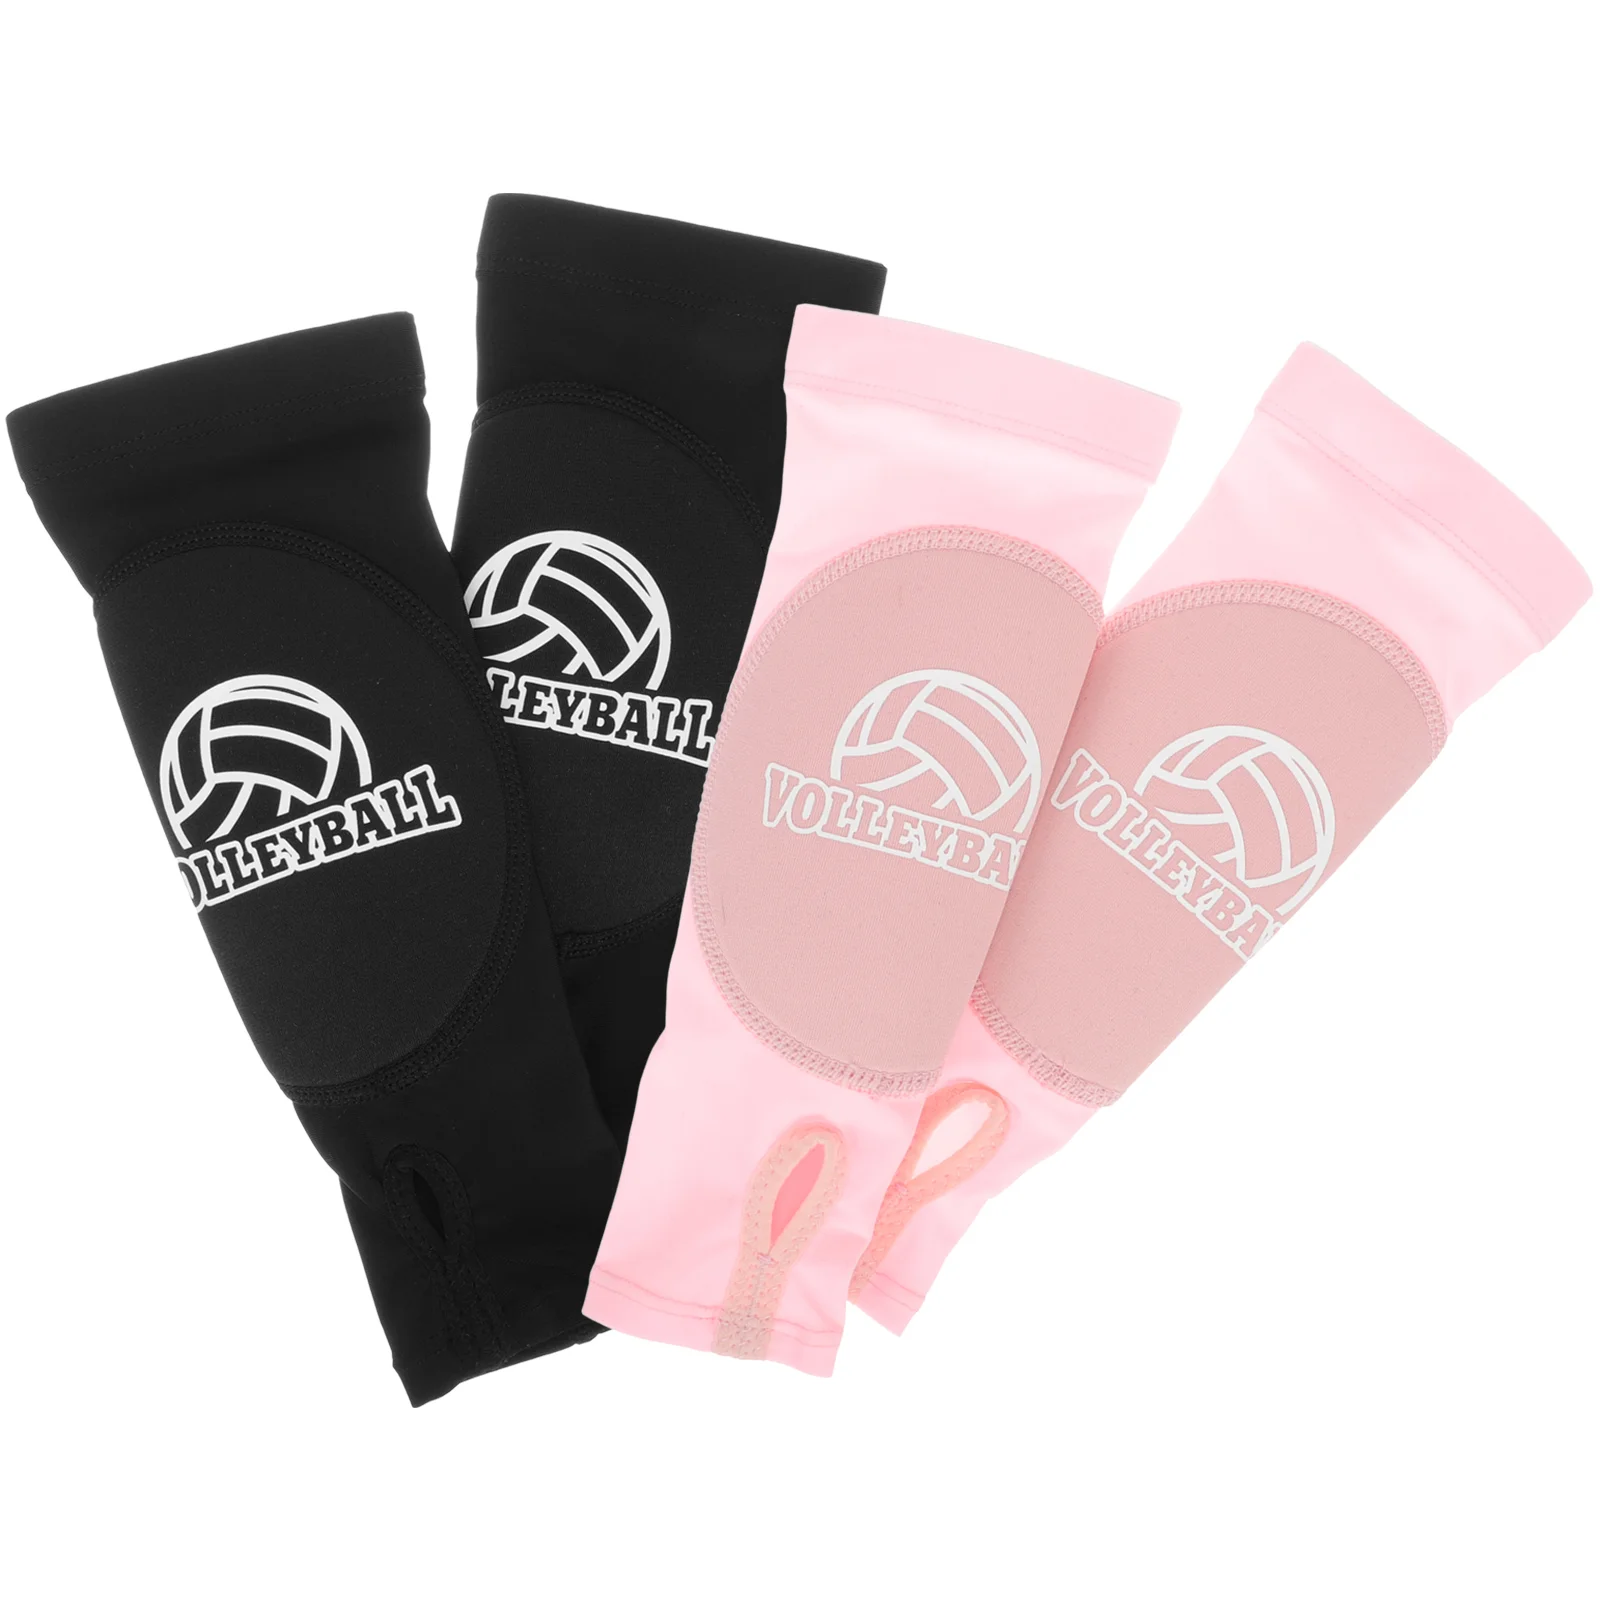 2Pcs super elastic basketball arm sleeve Volleyball armband breathable  Lycra cycling elbow pads support compression brace - AliExpress